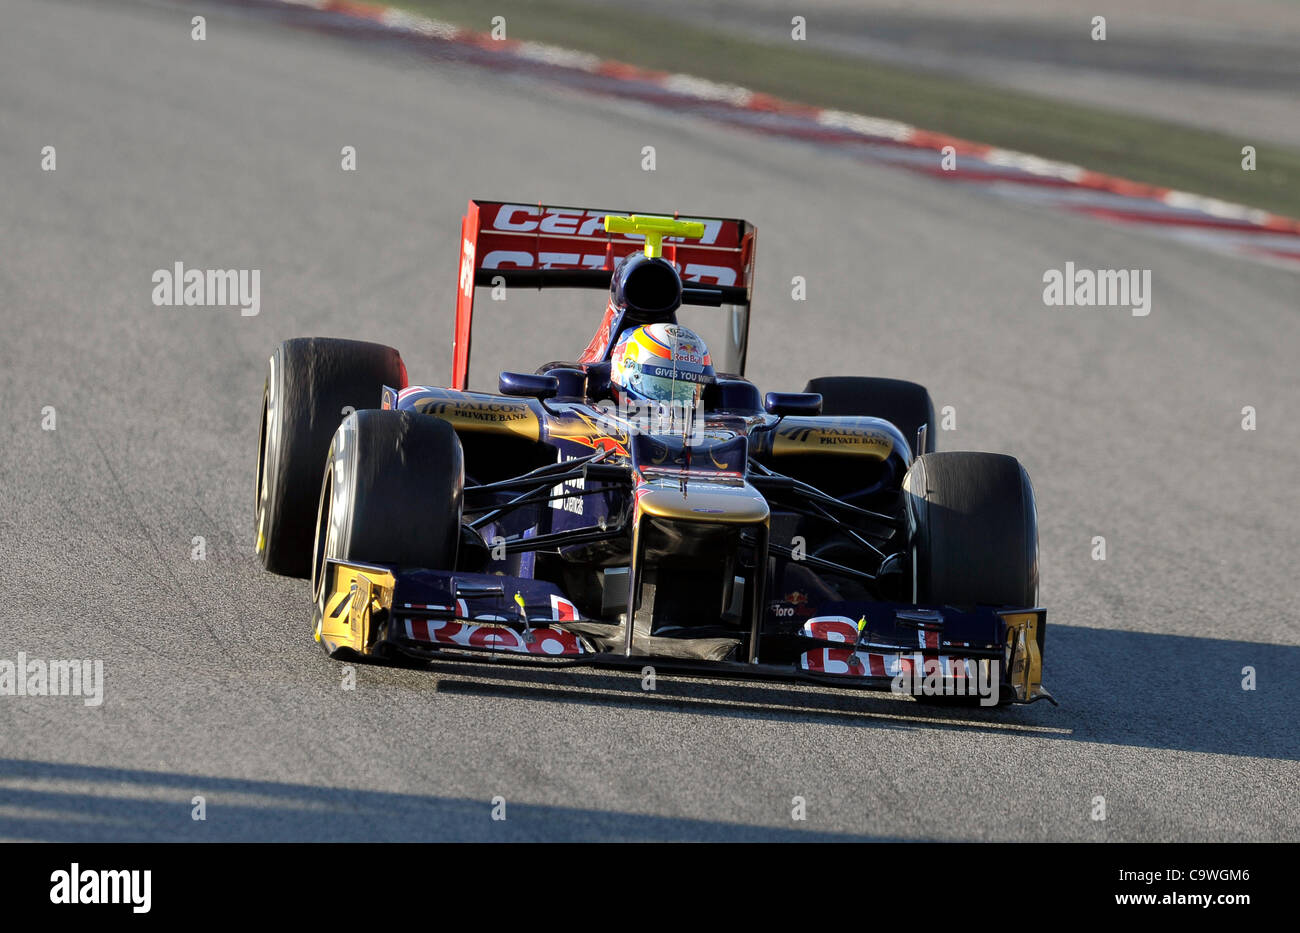 Jean-Eric Vergne (FRA) in the Toro Rosso STR7   during Formula One testing sessions on Circuito Catalunya, Spain Stock Photo